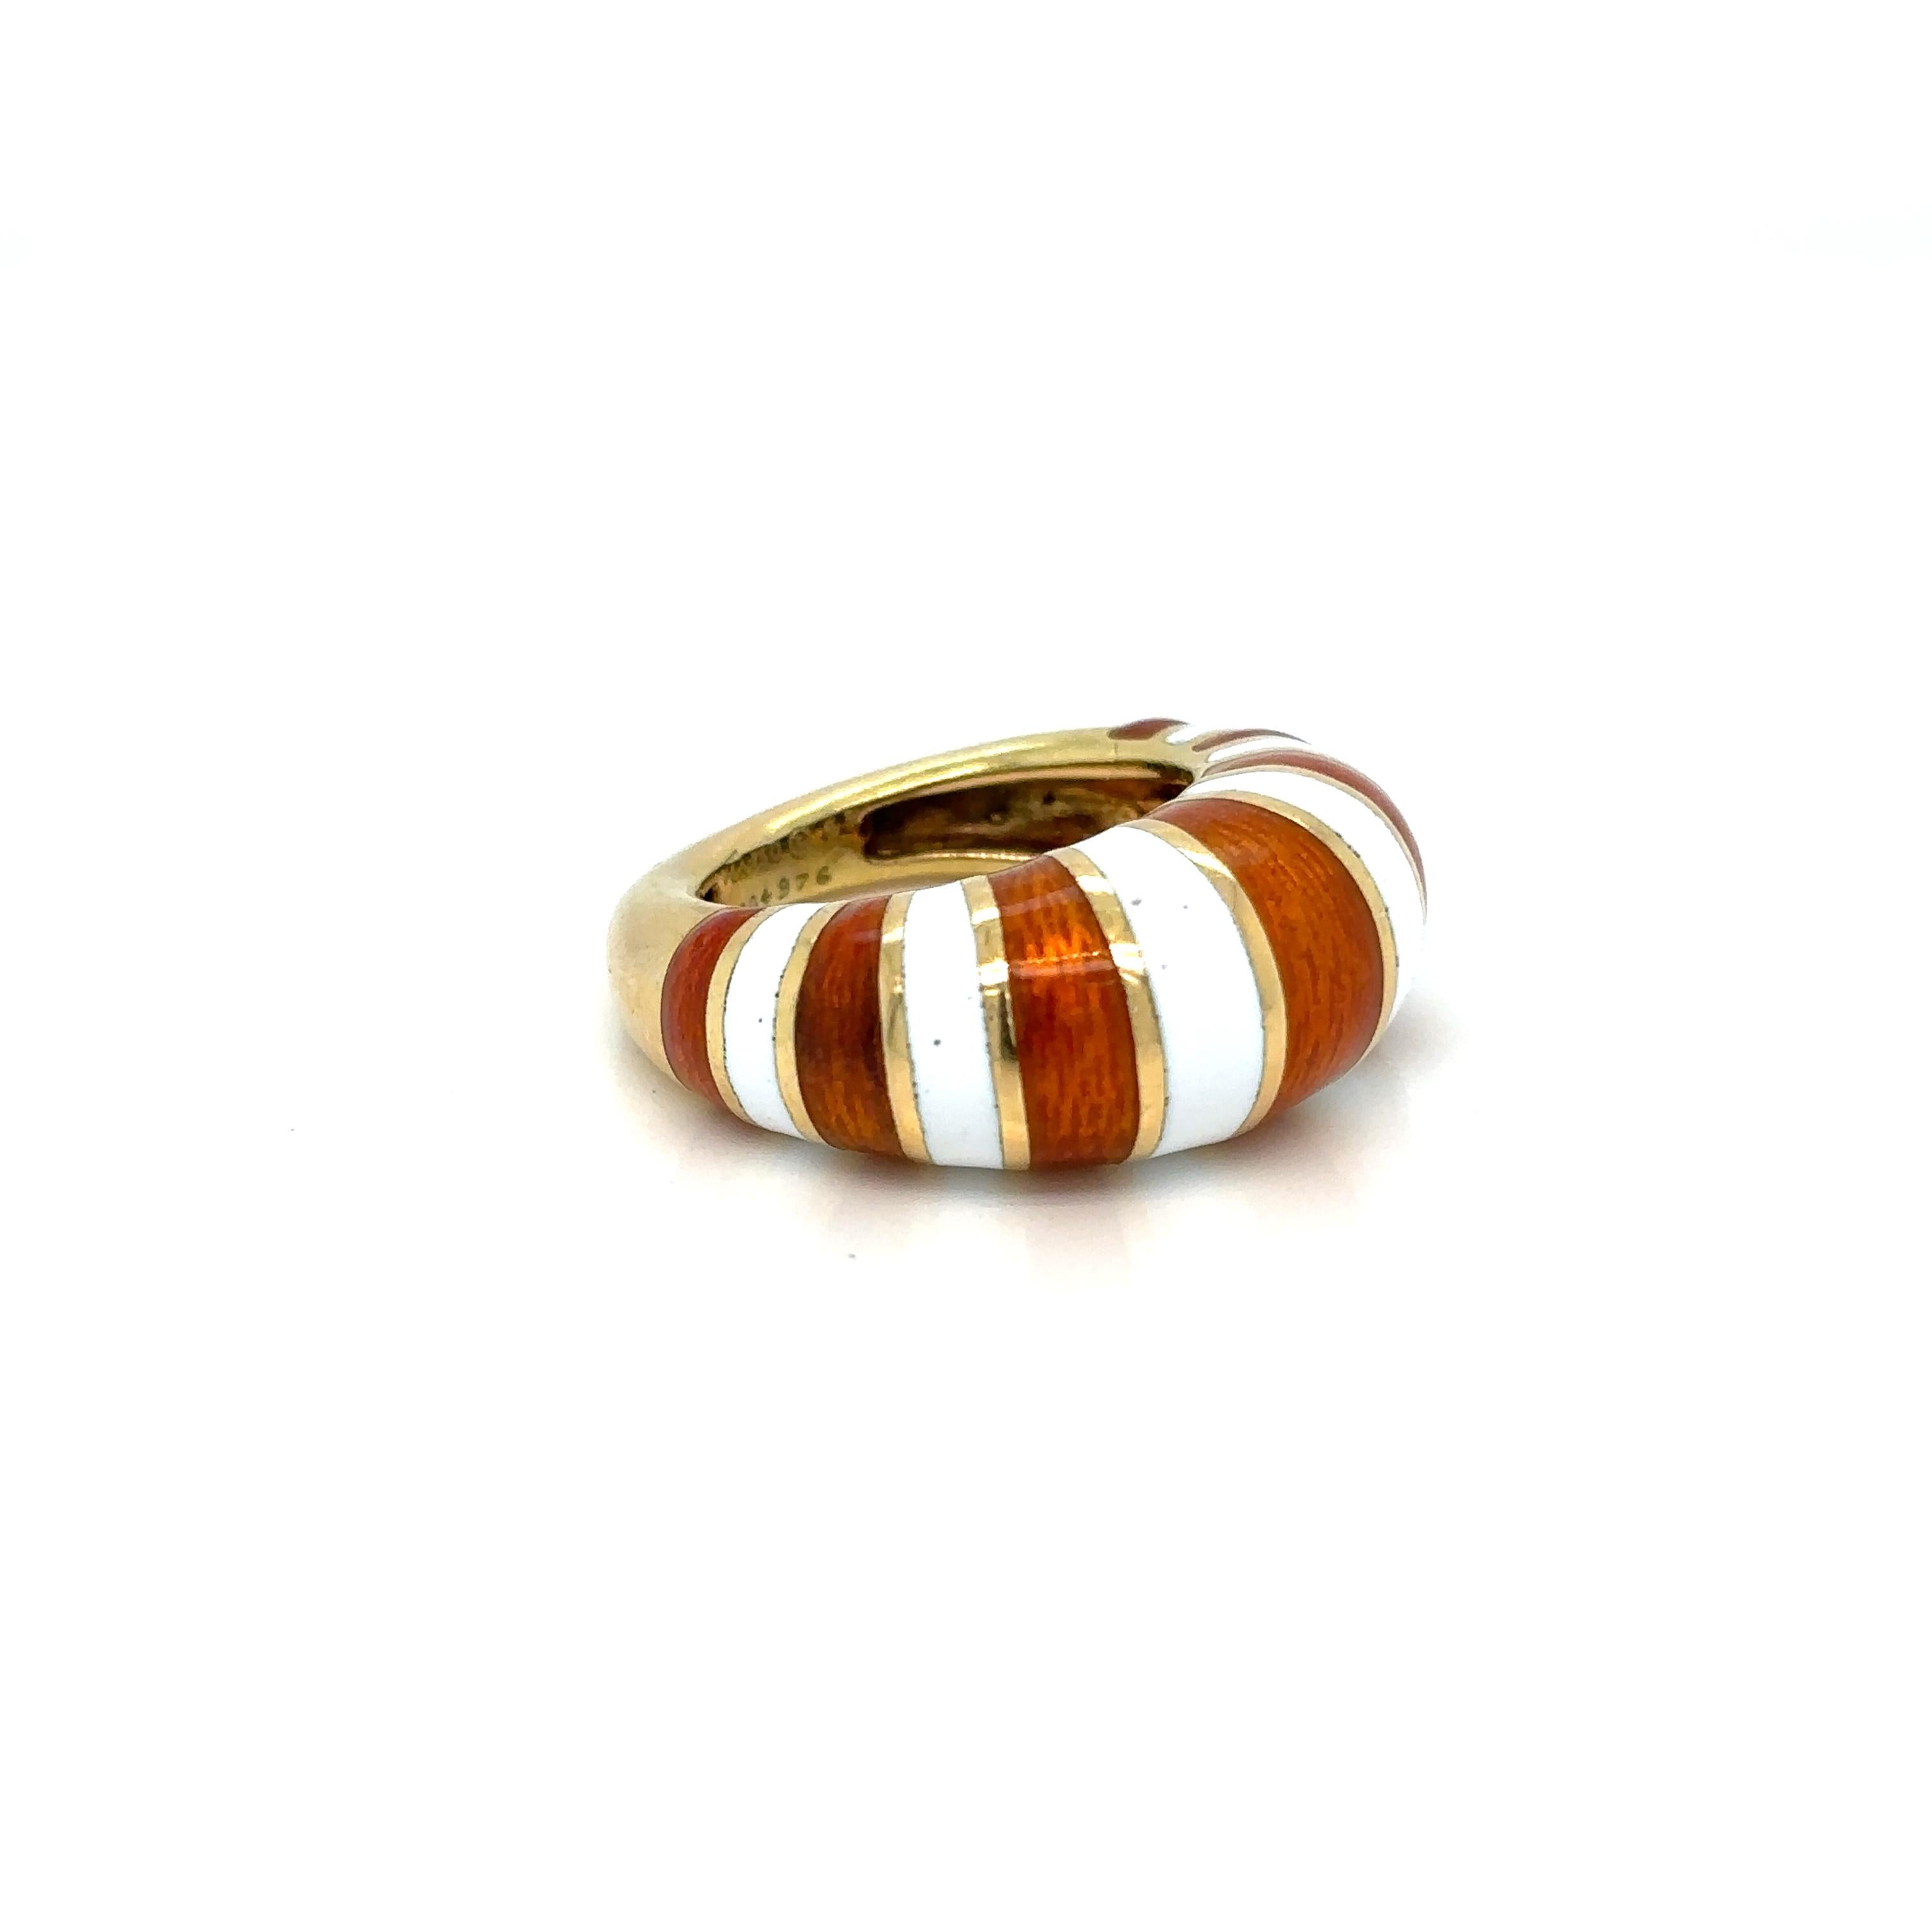 Vintage Van Cleef & Arpels white & brown enamel cocktail ring. 
Marked 18 carat yellow gold, signed 'VCA', numbered, maker's mark 'P&Fils' for Péry et Cie, French, circa 1960.

Péry worked as manufacturer for Van Cleef & Arpels, but also worked for